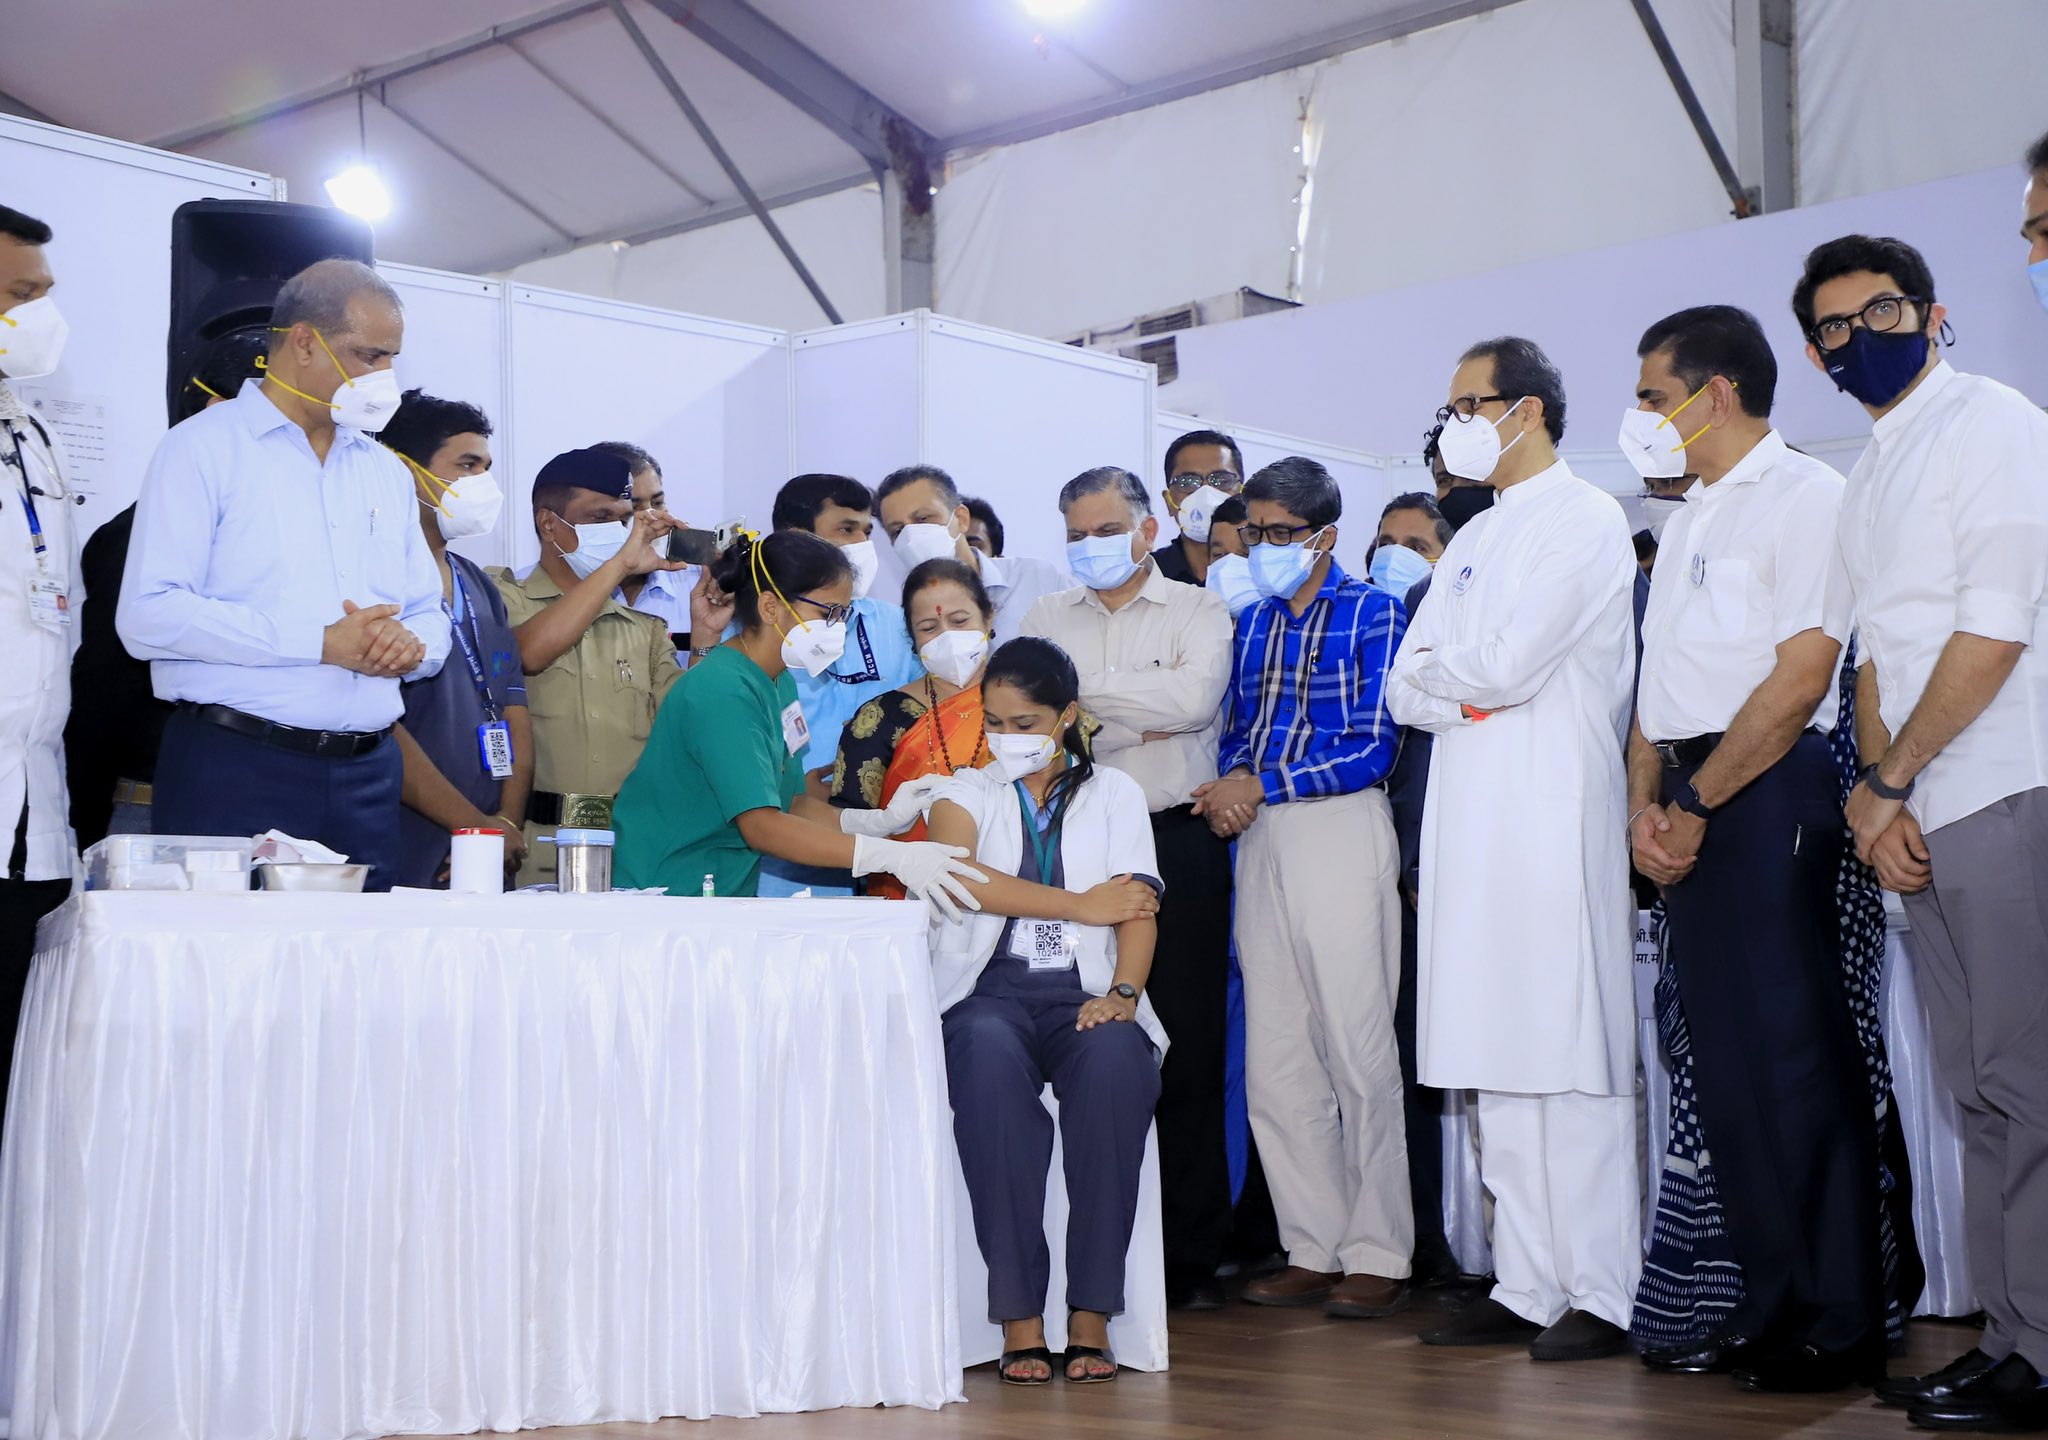 14 adverse cases on Day 1 of COVID vaccination drive in Maharashtra